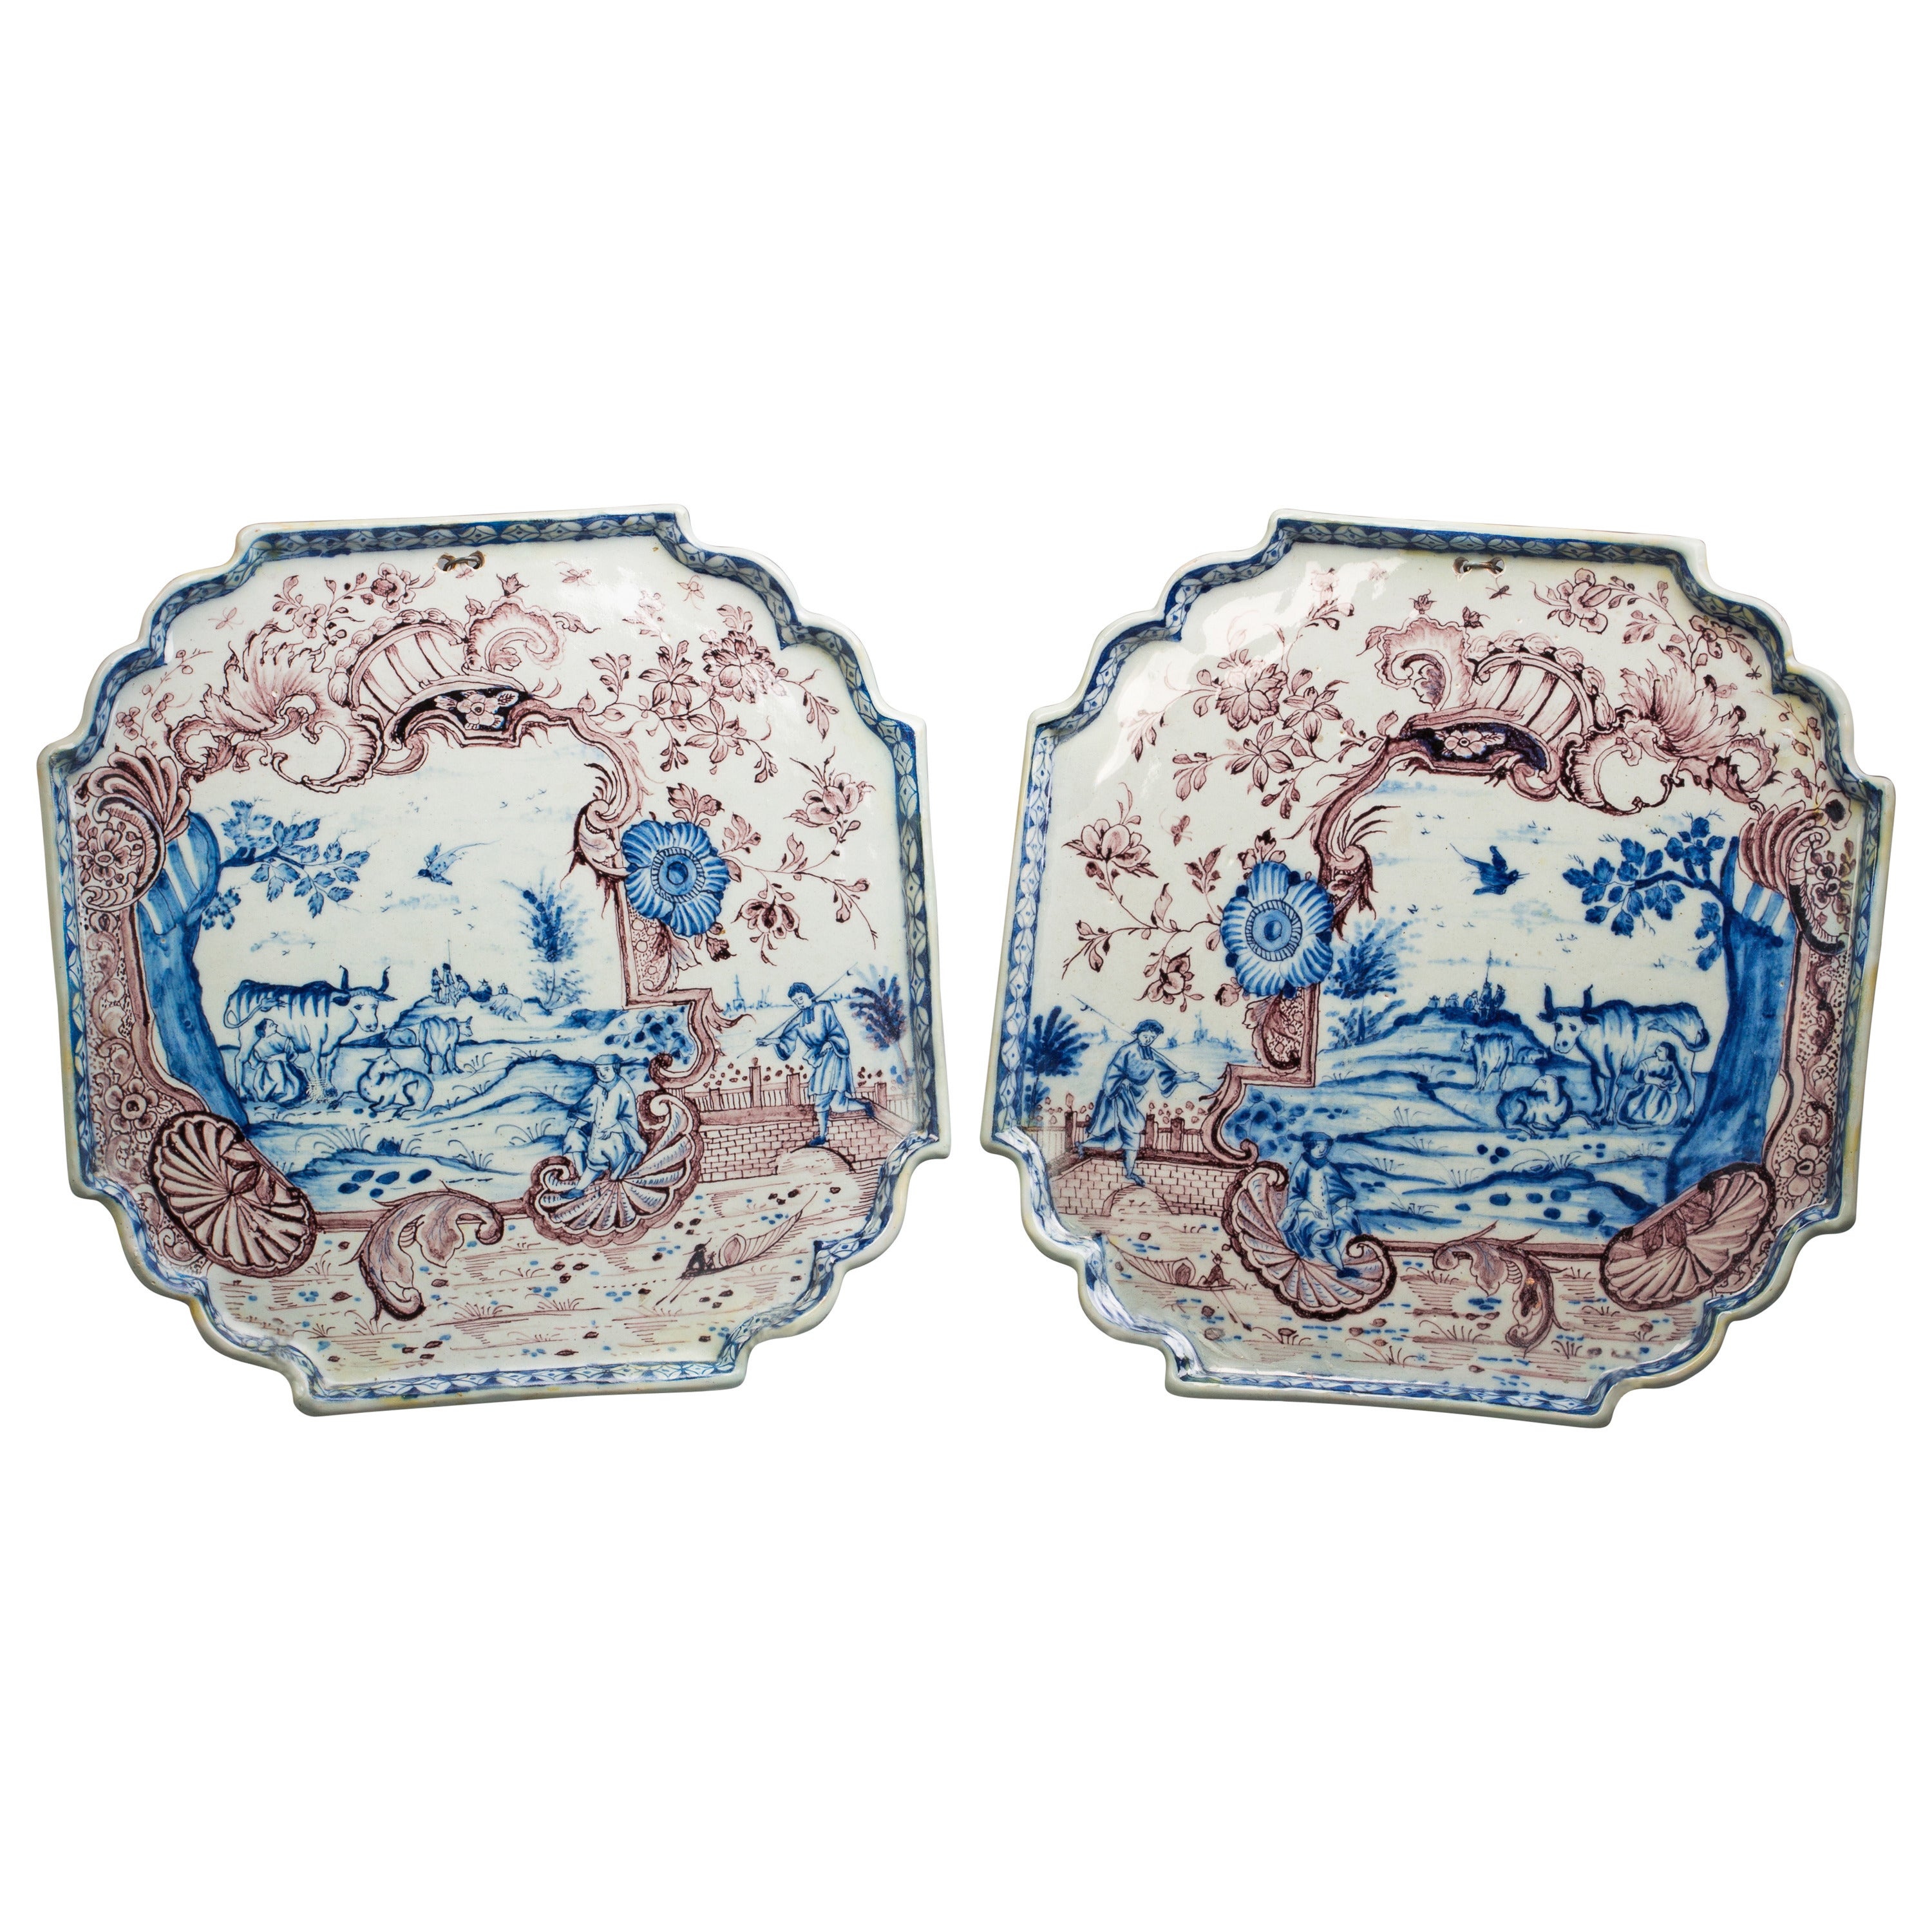 Pair of Delft Footed Decorative Trays, circa 1750